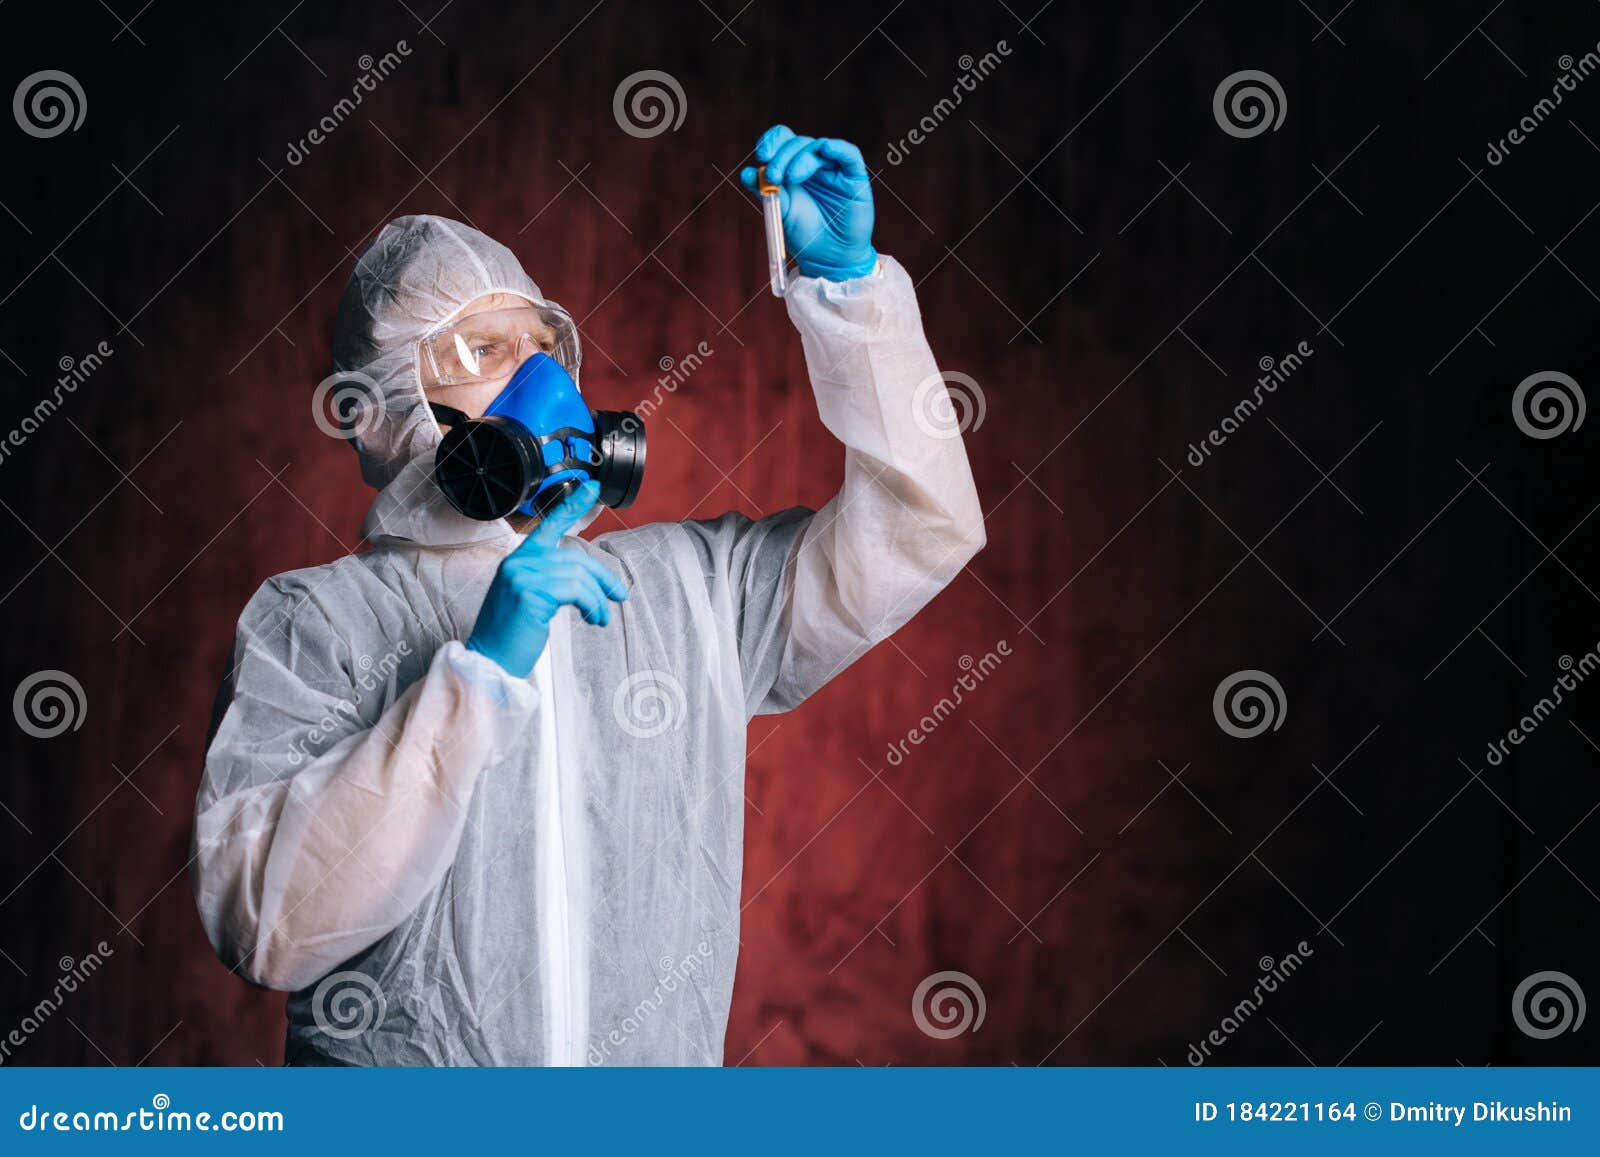 Medical Worker in Protective Suit, Goggles and Respirator Holds Test ...